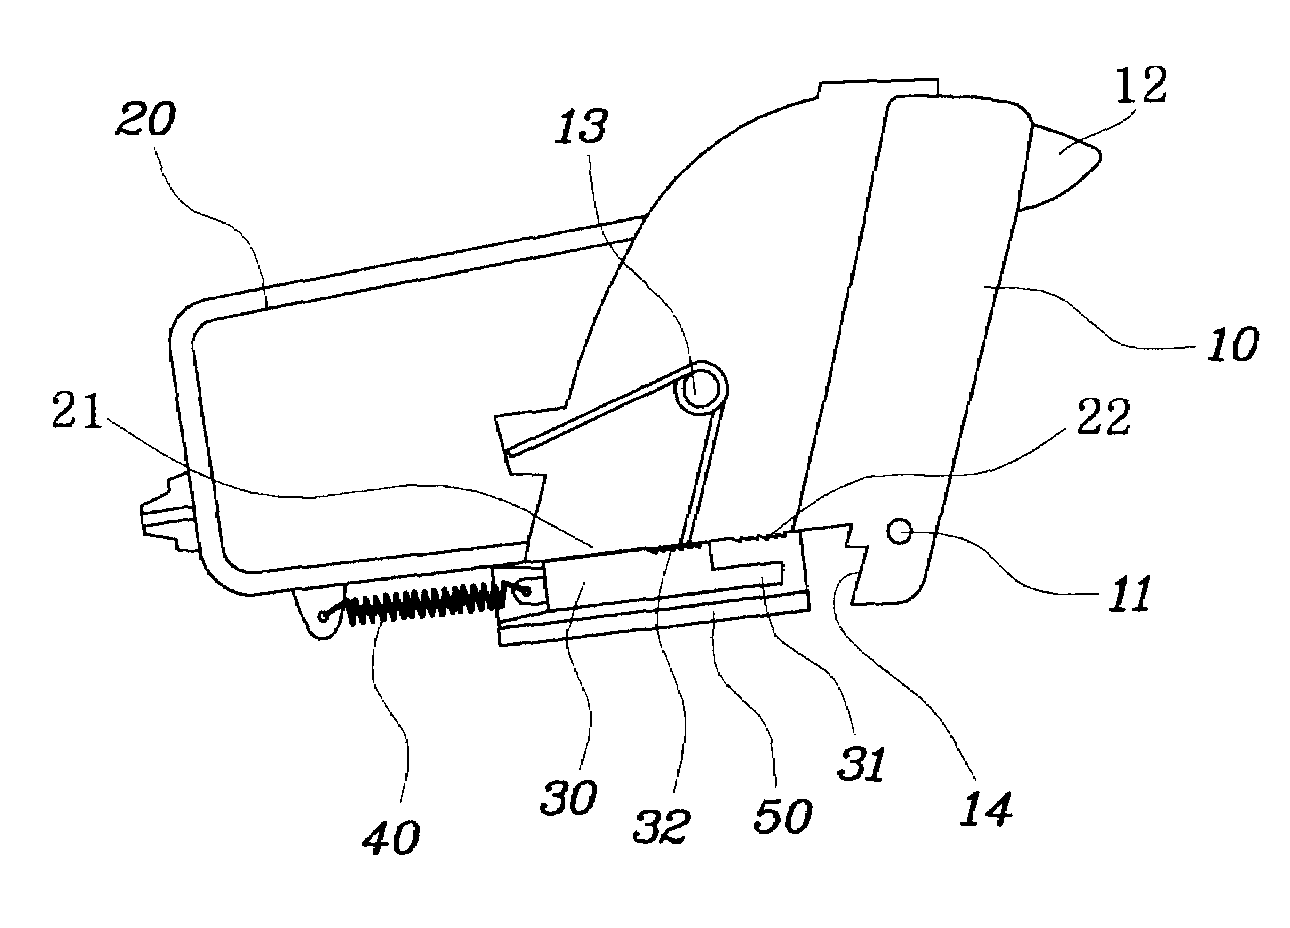 Apparatus for preventing vehicle tray from being opened by inertia load